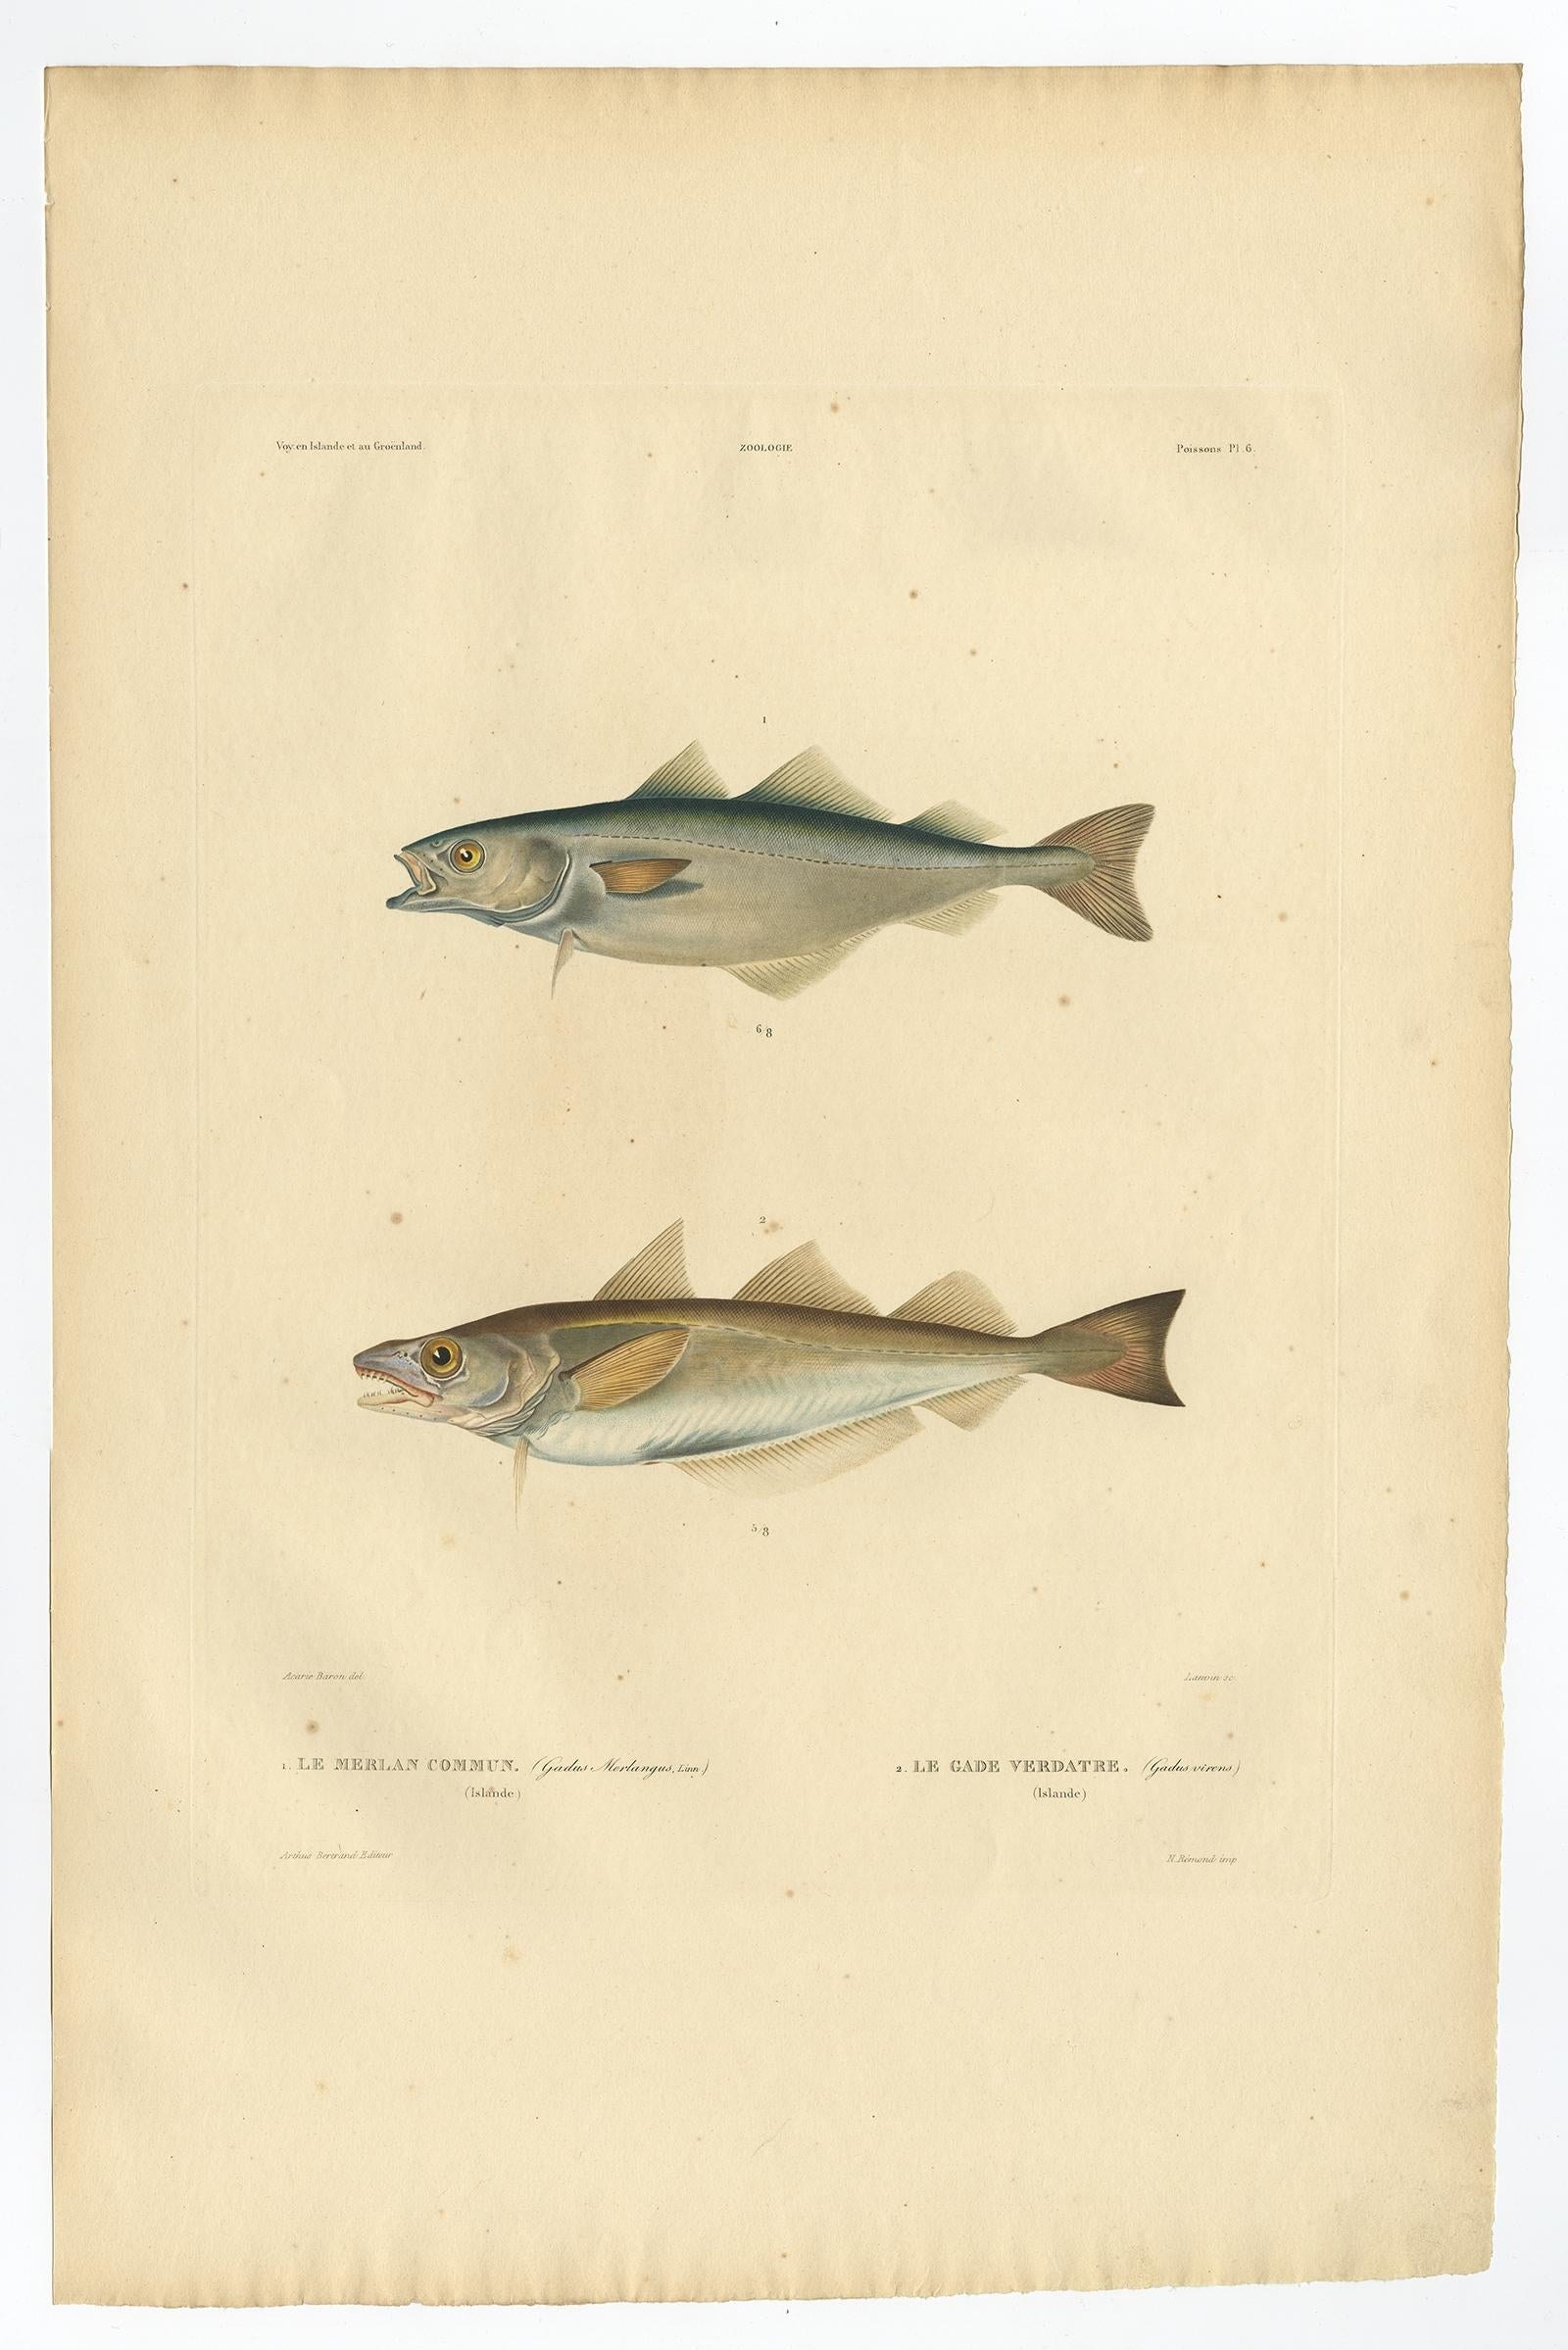 Antique print, titled: 'Poissons Plate 6 - Le Merlan Commun (Gadus merlangus) - Le Gade Verdatre (Gadus virens).' 

This rare plate shows the Merlangius merlangus, commonly known as whiting or merling and the Saithe (Pollachius virens). From: